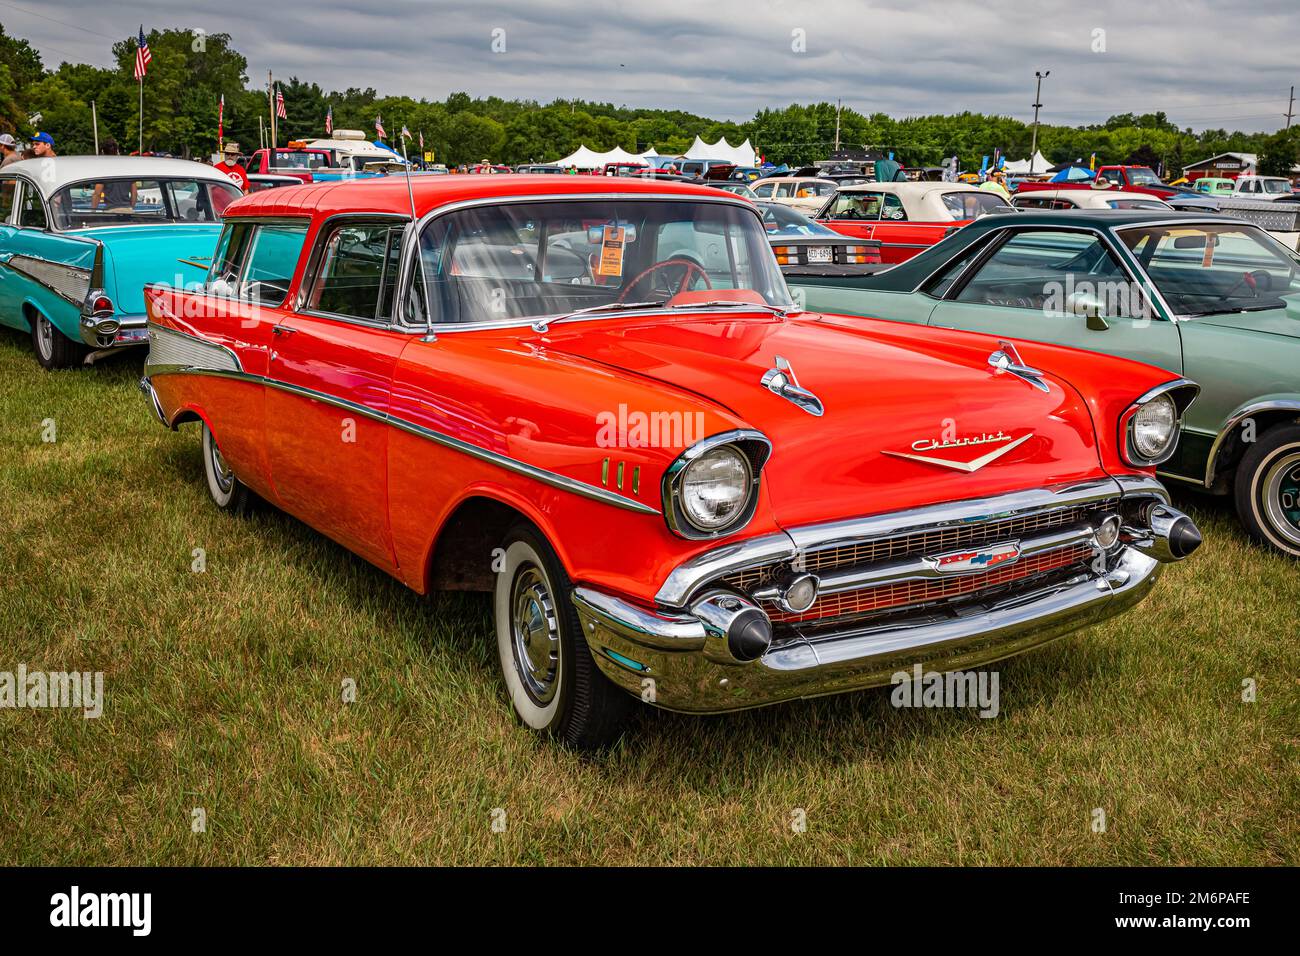 Iola, WI - July 07, 2022: High perspective front corner view of a 1957 Chevrolet Nomad Station Wagon at a local car show. Stock Photo